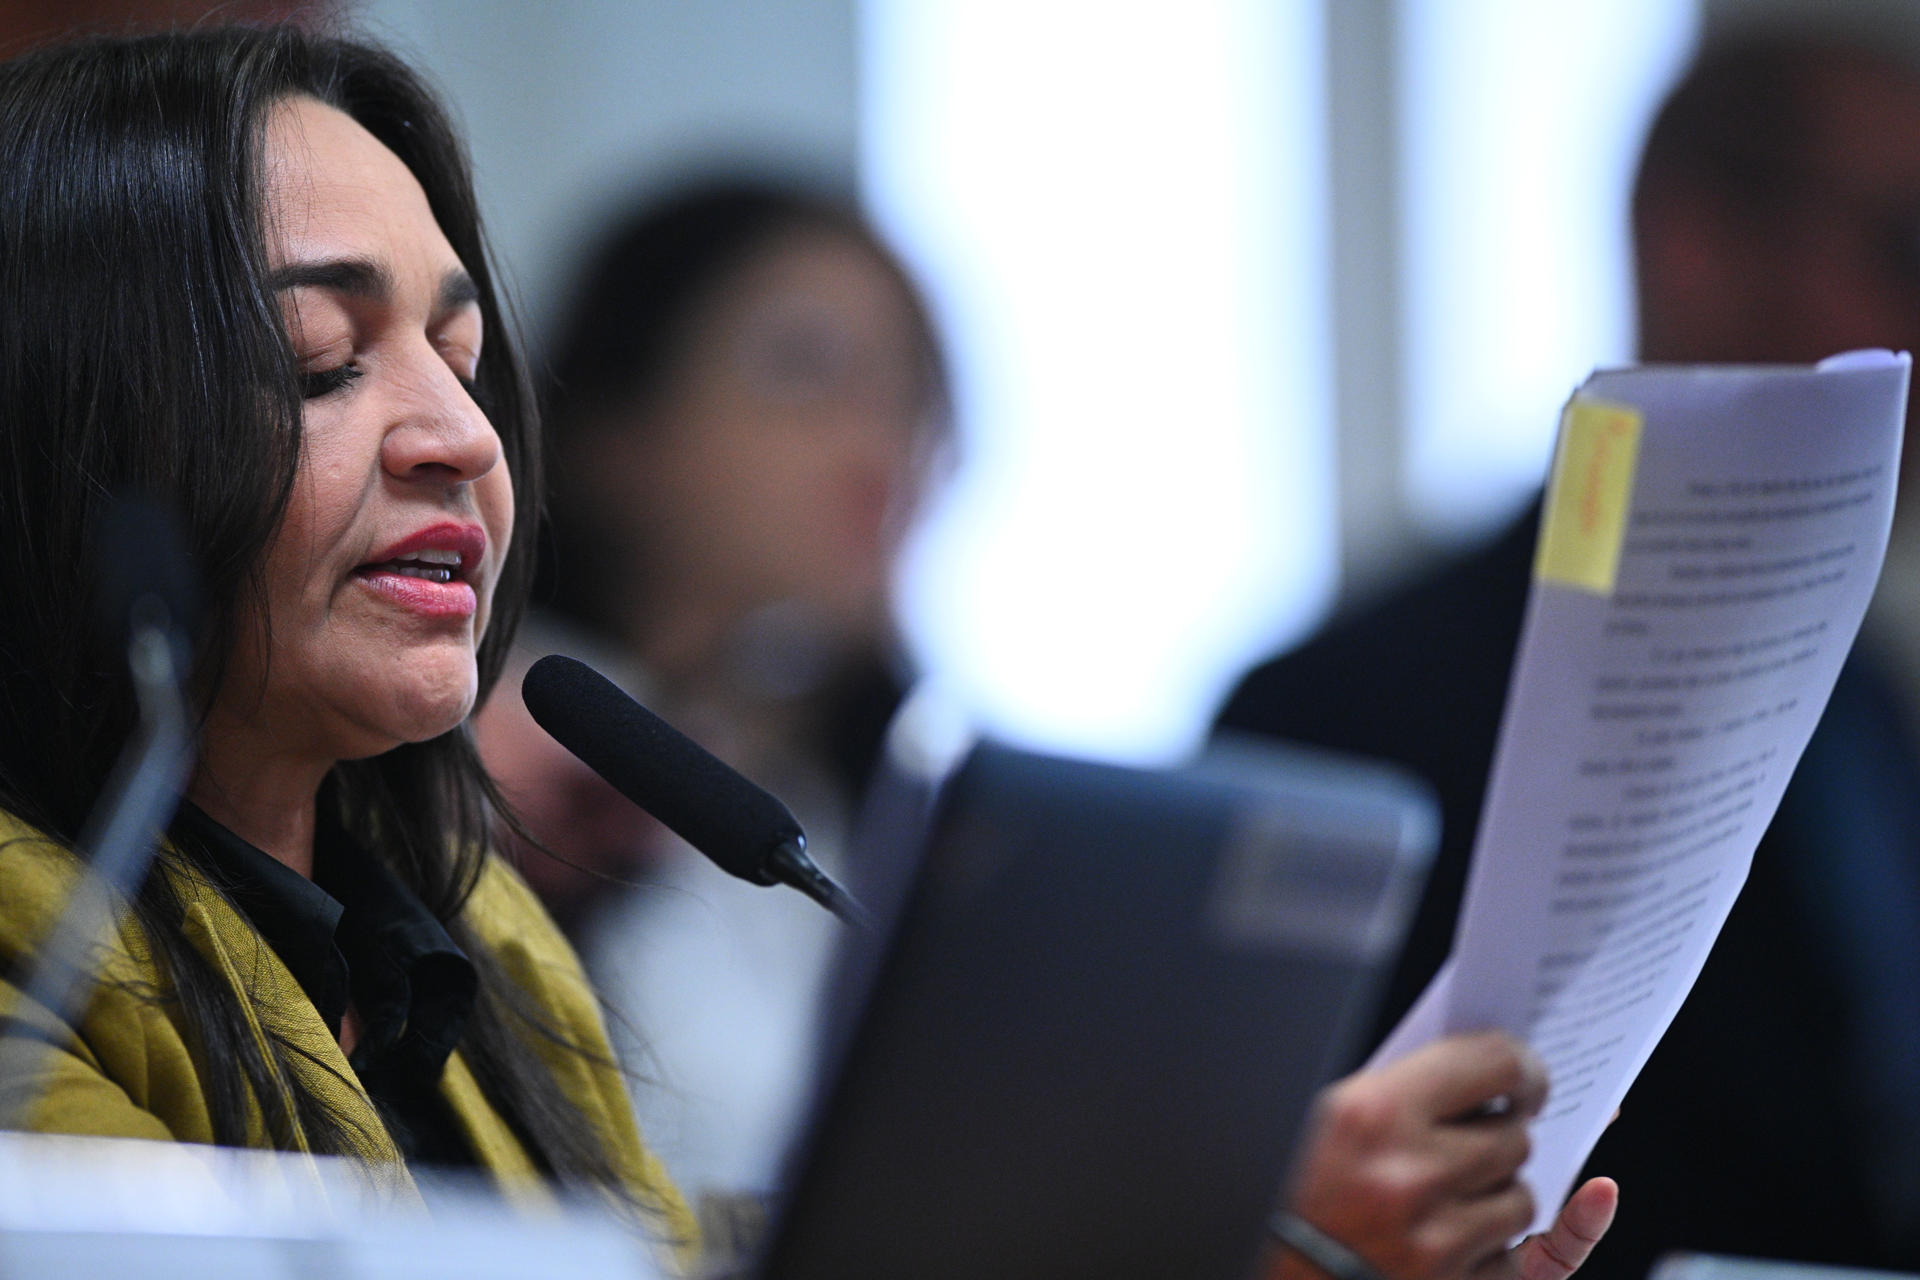 The rapporteur of the Joint Parliamentary Commission of Inquiry, Senator Eliziane Gama, reads the commission's final report on the anti-democratic acts of January 8, at the Federal Senate, in Brasilia, Brazil, October 17, 2023. EFE/ Andre Borges